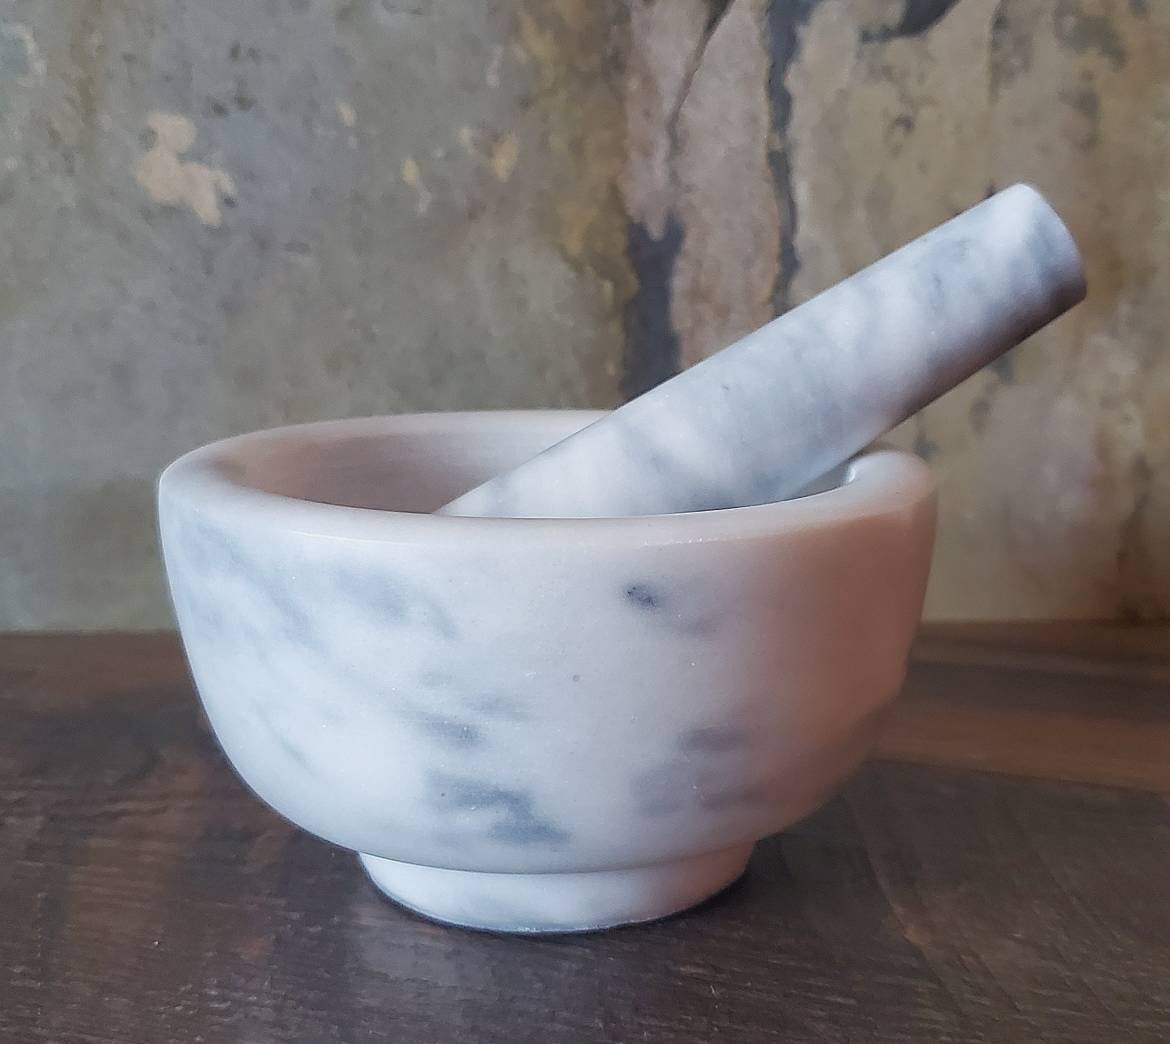 Marble Mortar and Pestle Set Large Heavy White Marble -  Finland